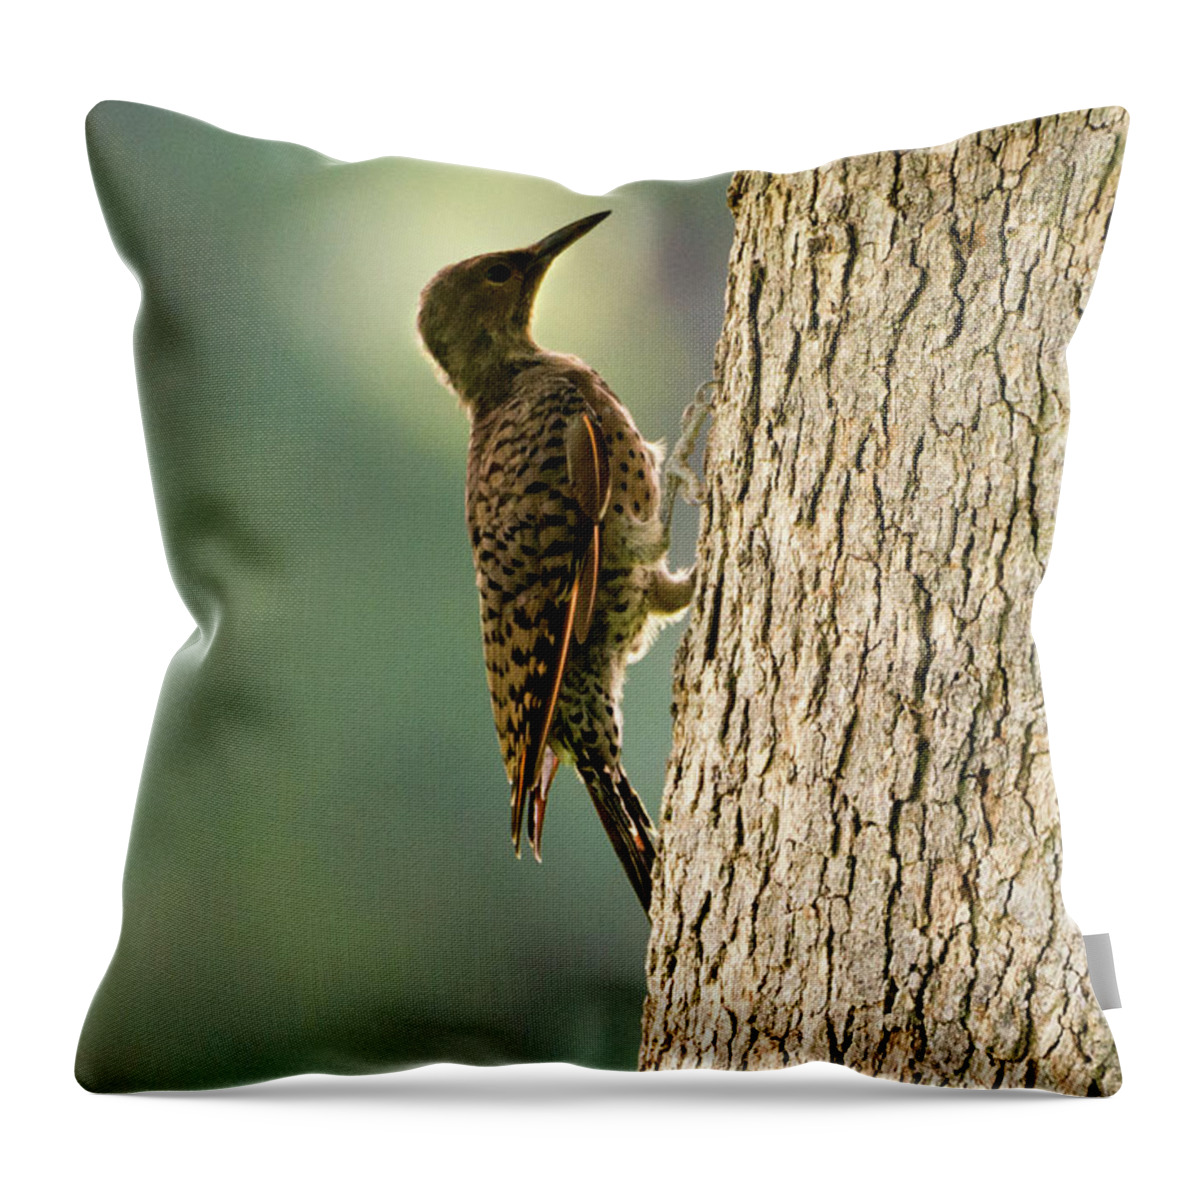 Northern Flicker Throw Pillow featuring the photograph Northern Flicker Halo by Michael Dawson